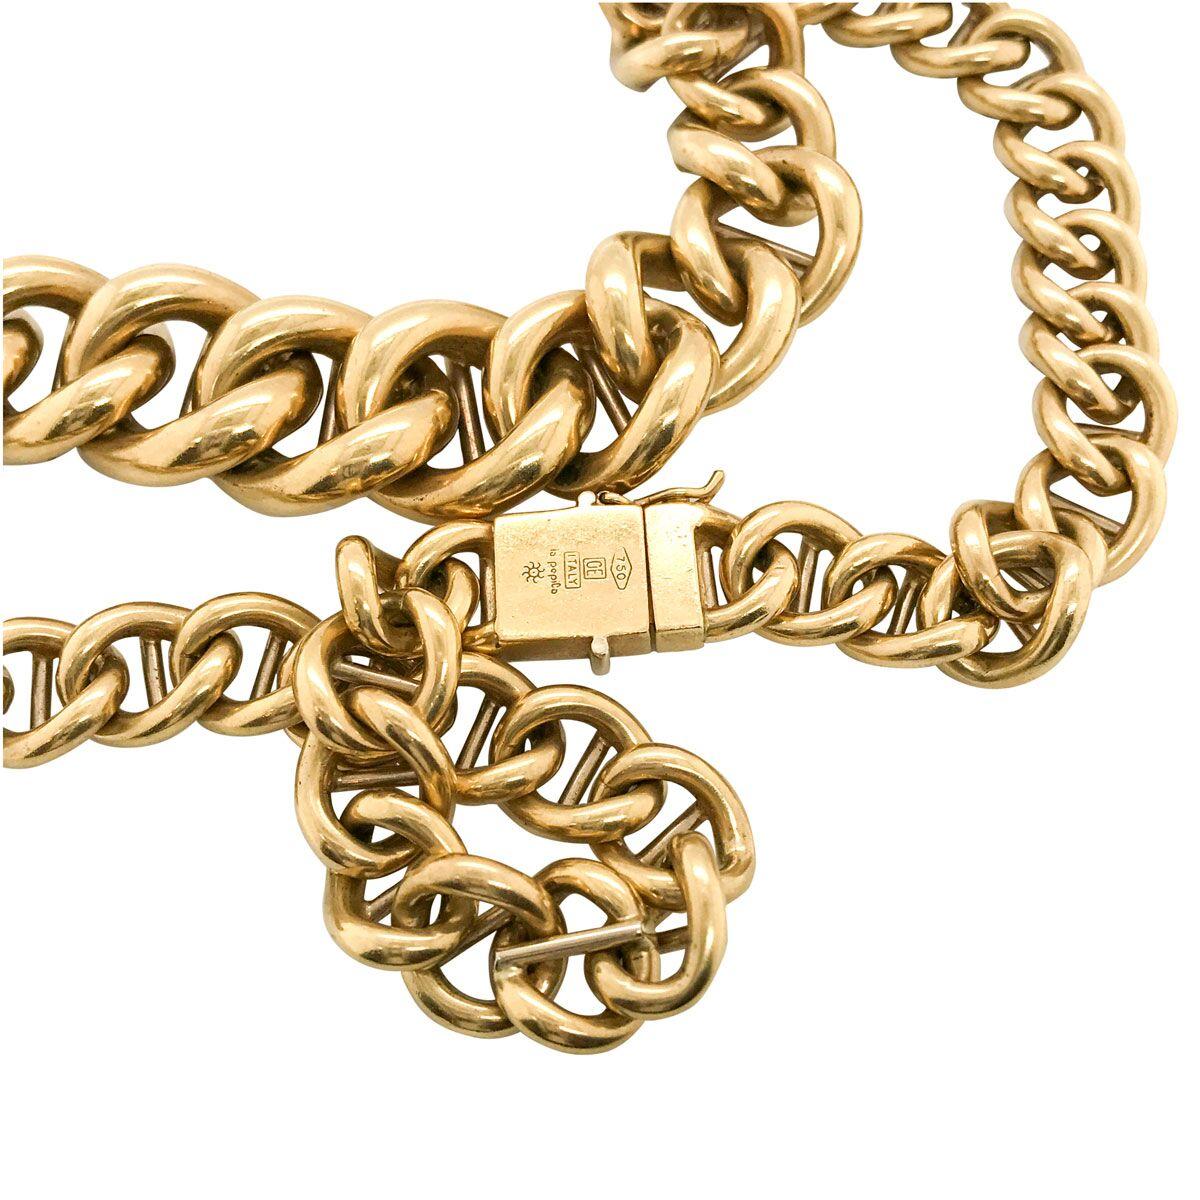 Contemporary 18 Karat Yellow Gold Italian Graduated Curb Link Chain Necklace